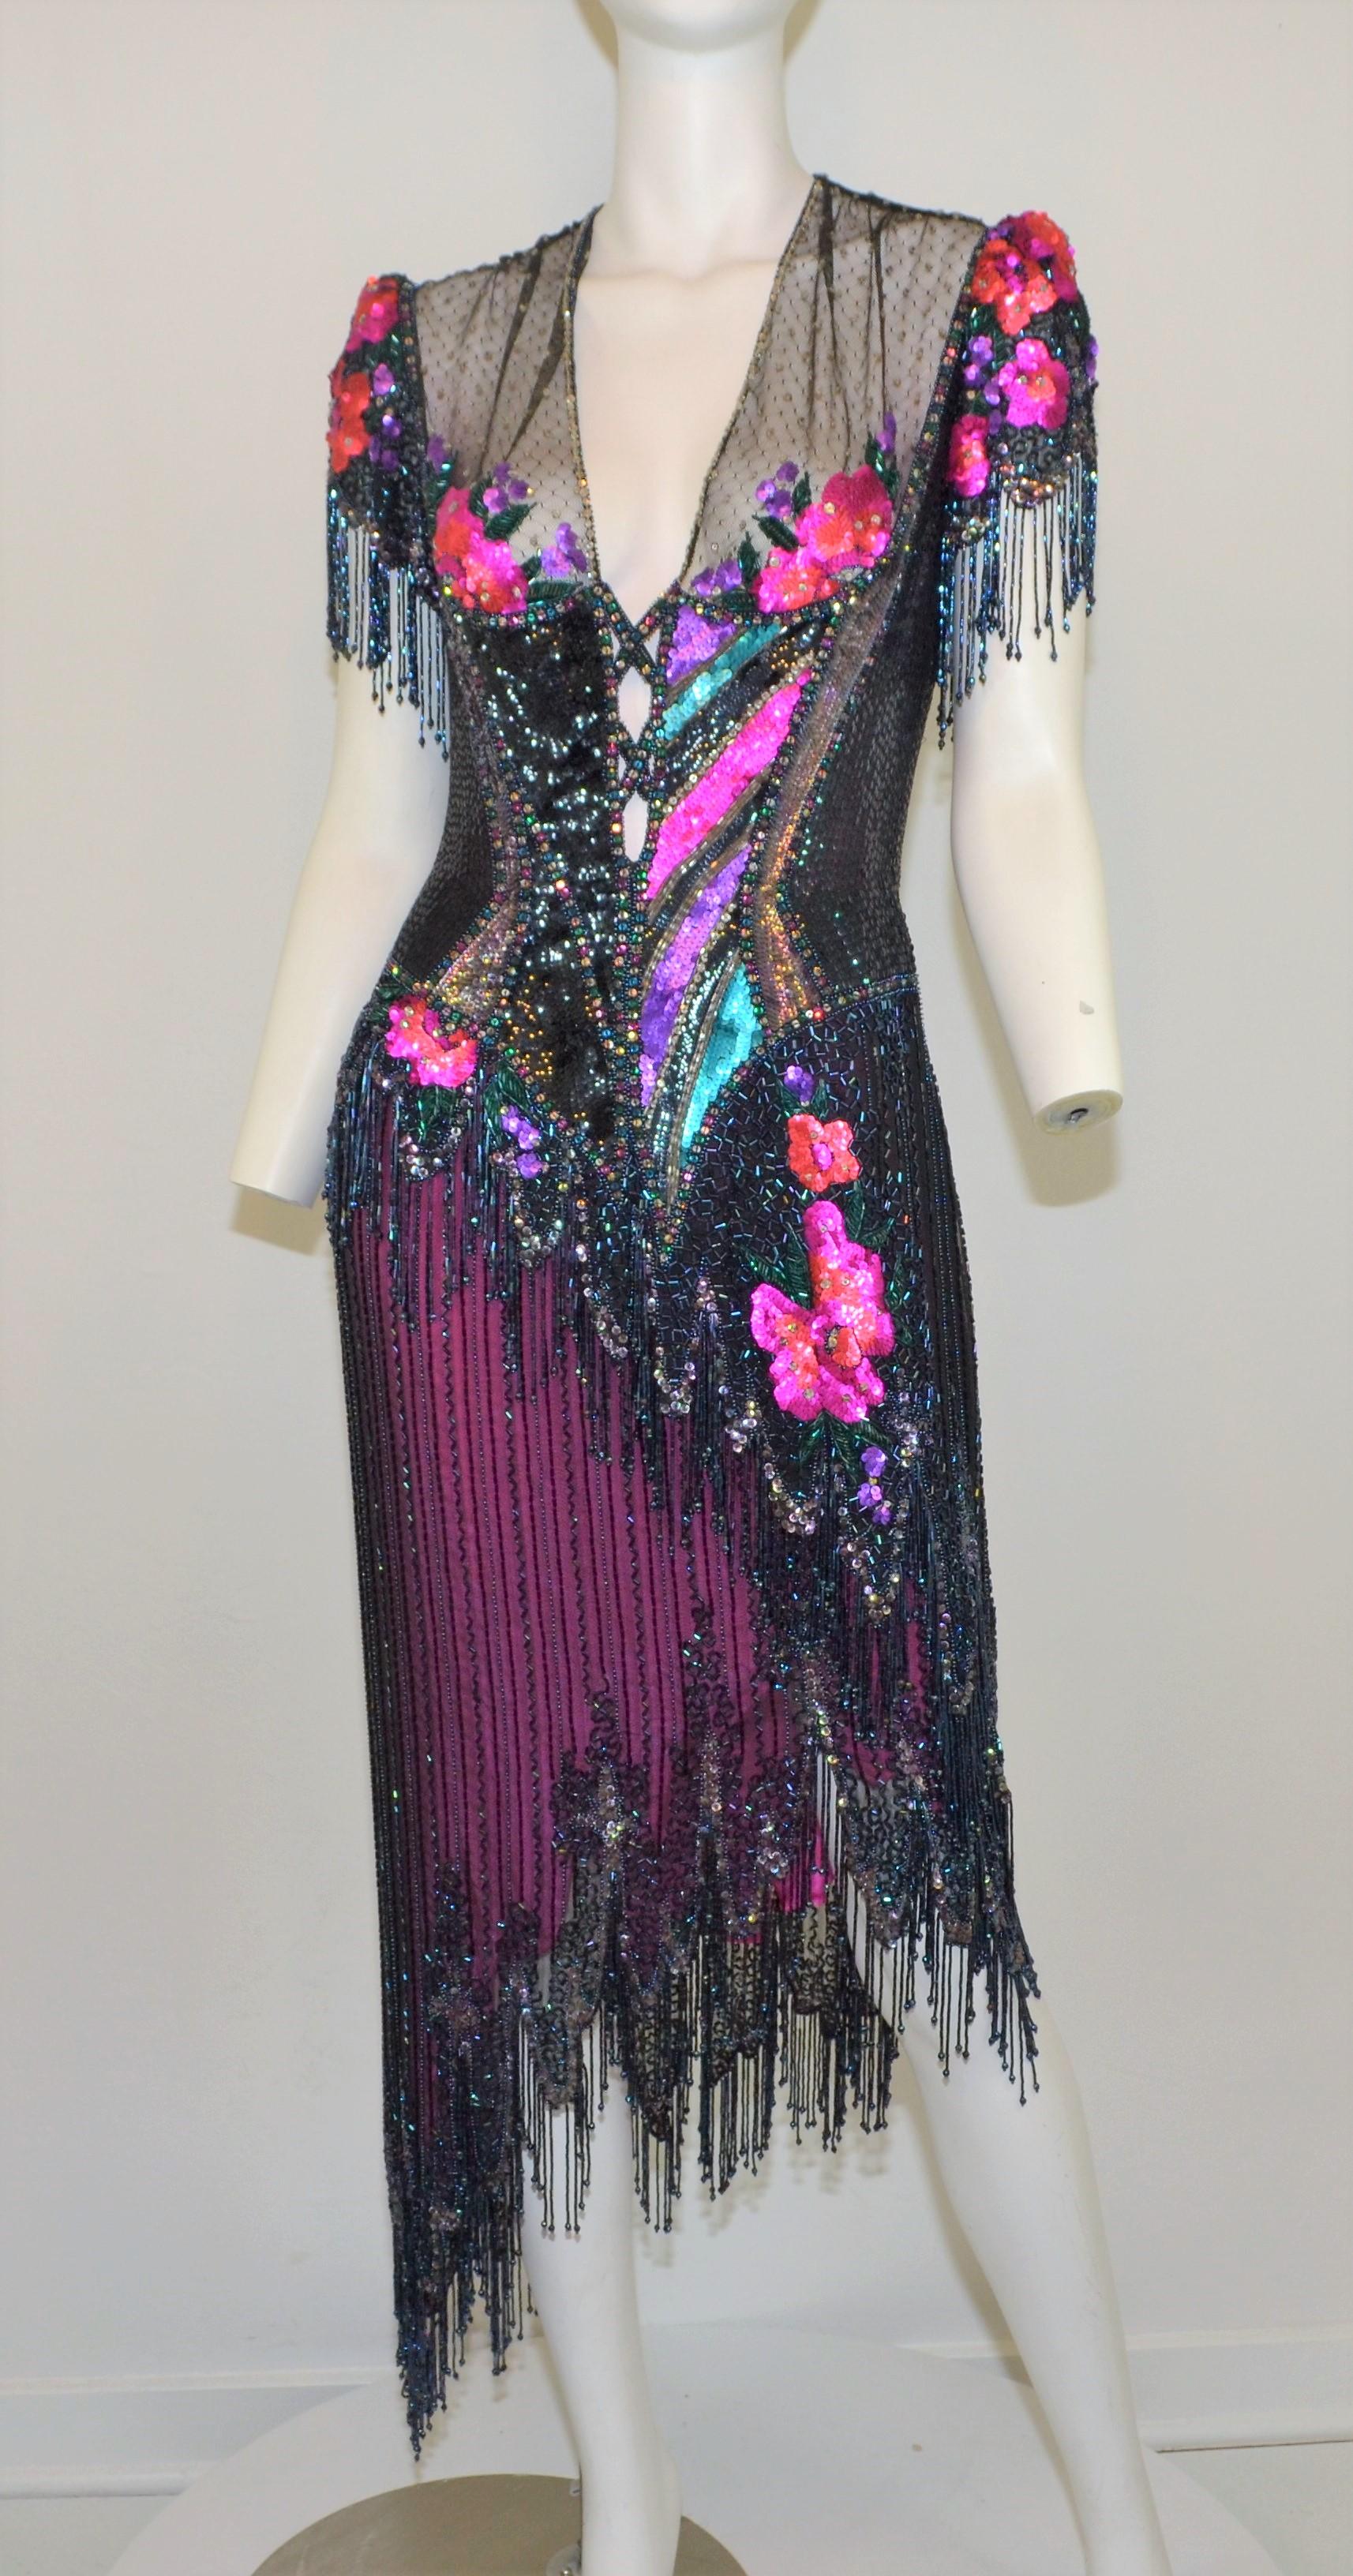 Bob Mackie 1970's Fringe Beaded Evening Dress -- Featured in a variation of jewel tones throughout with a fringed, asymmetric hem design. Dress has a floral motif, mesh back with a zipper and hook-and-eye fastening. Dress is in great vintage